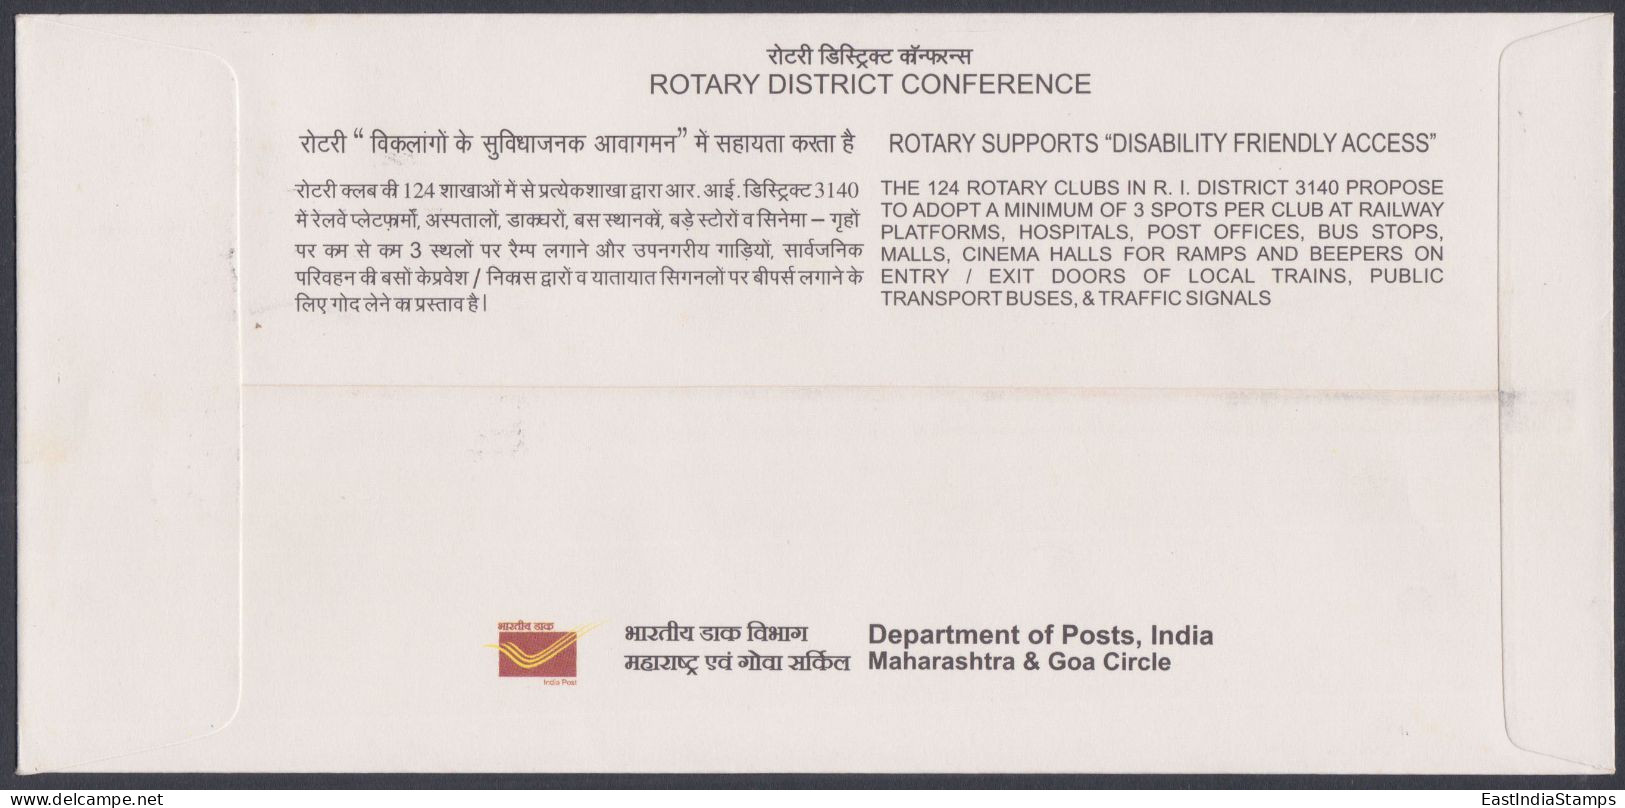 Inde India 2010 Special Cover Rotary District Conference, Disability Access, Wheelchair, Ramp, Pictorial Postmark - Briefe U. Dokumente